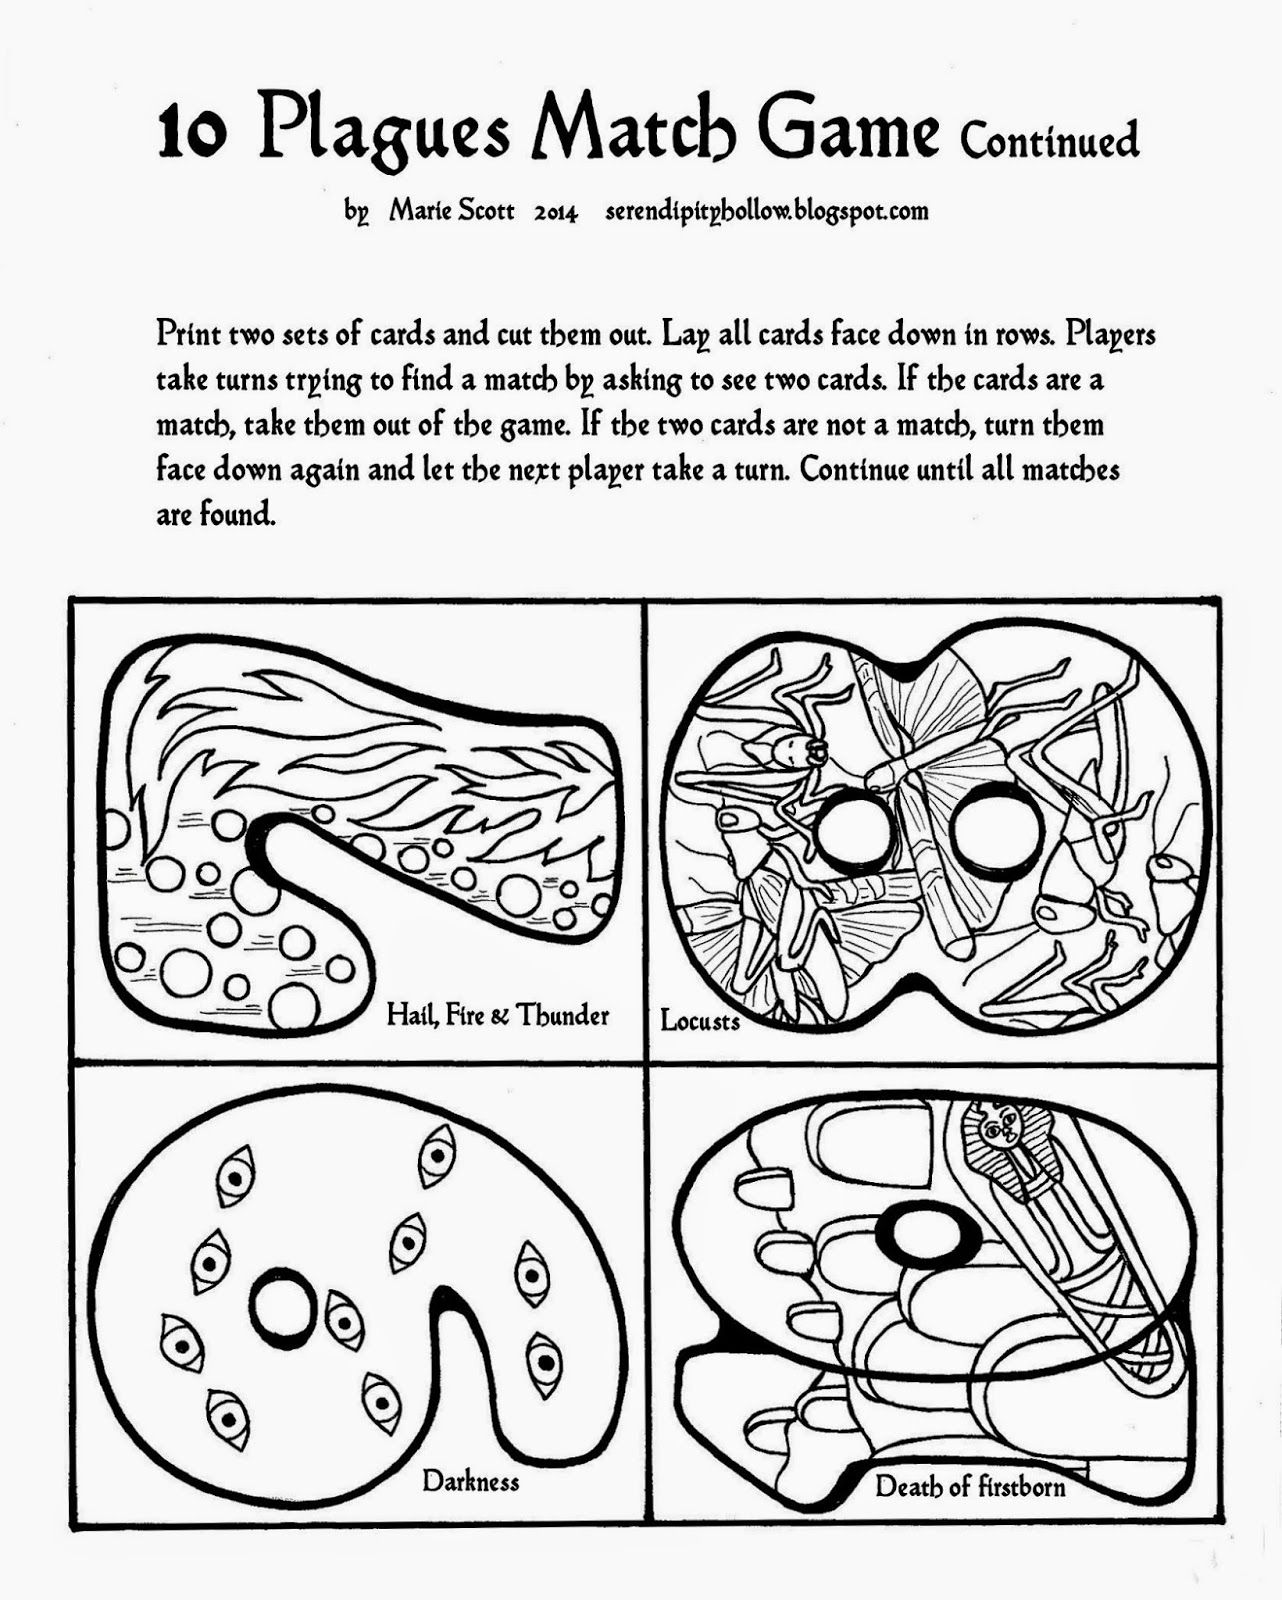 Ten Plagues - Coloring Pages for Kids and for Adults